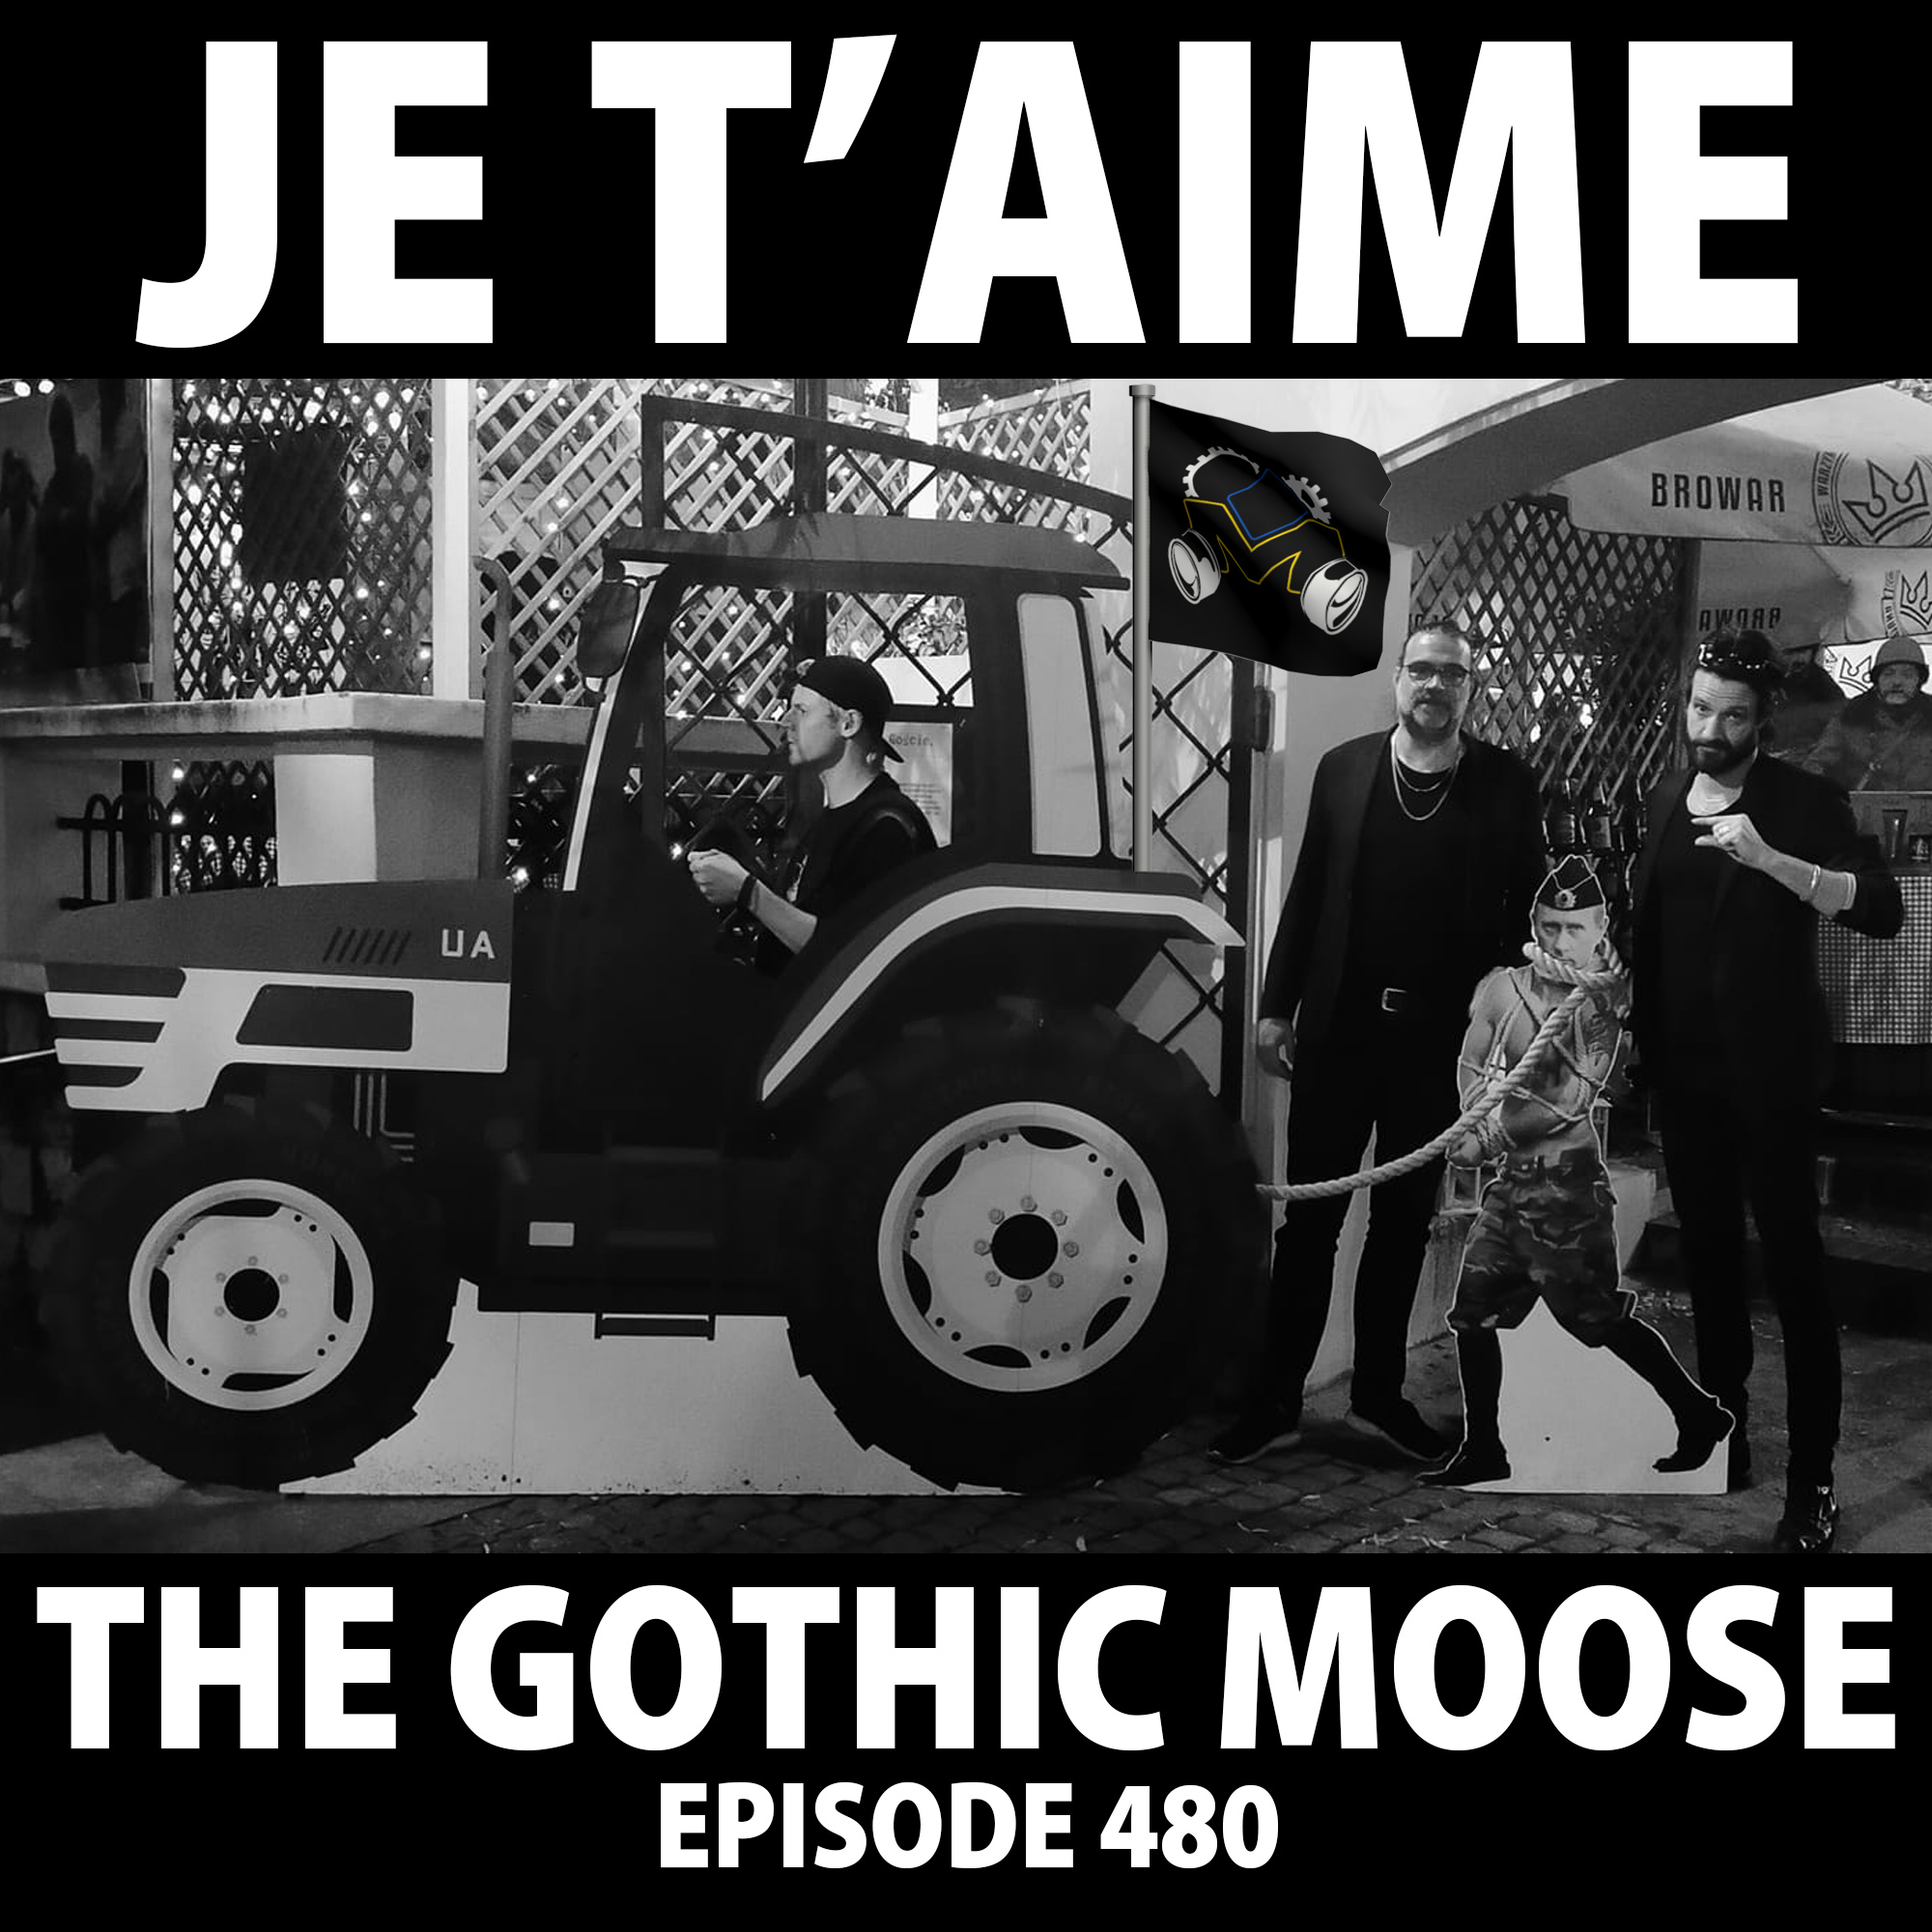 The Gothic Moose – Episode 480 – with Very Special Guests JE T’AIME